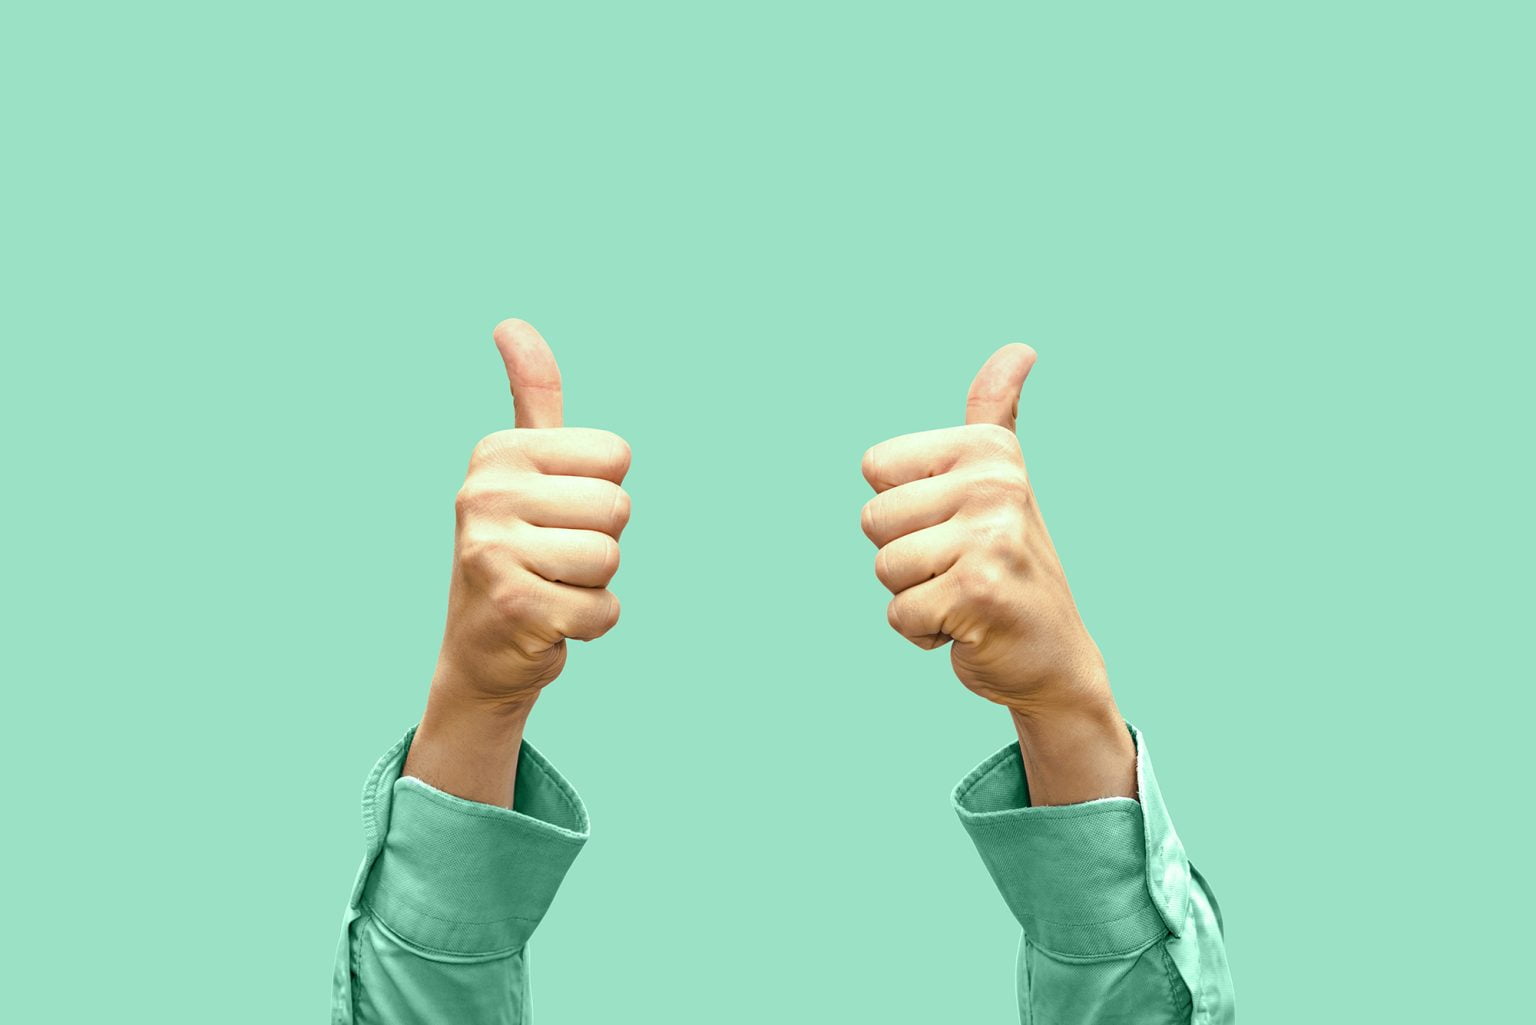 View of two hands with thumbs up